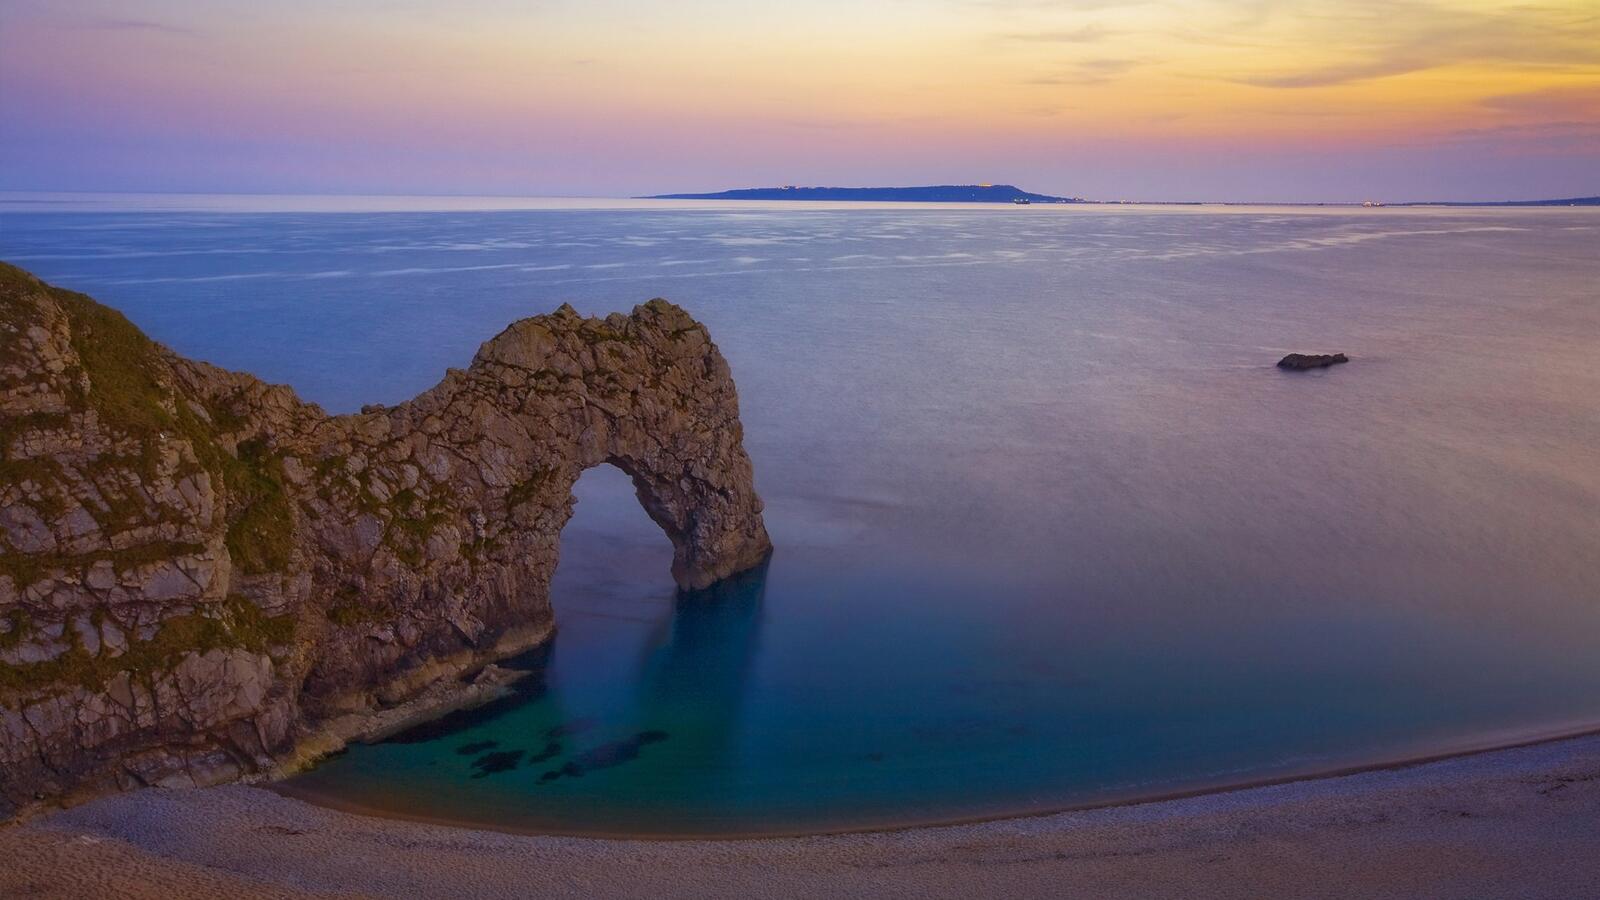 Free photo A rock on the shore of the beach with an arch-shaped ledge